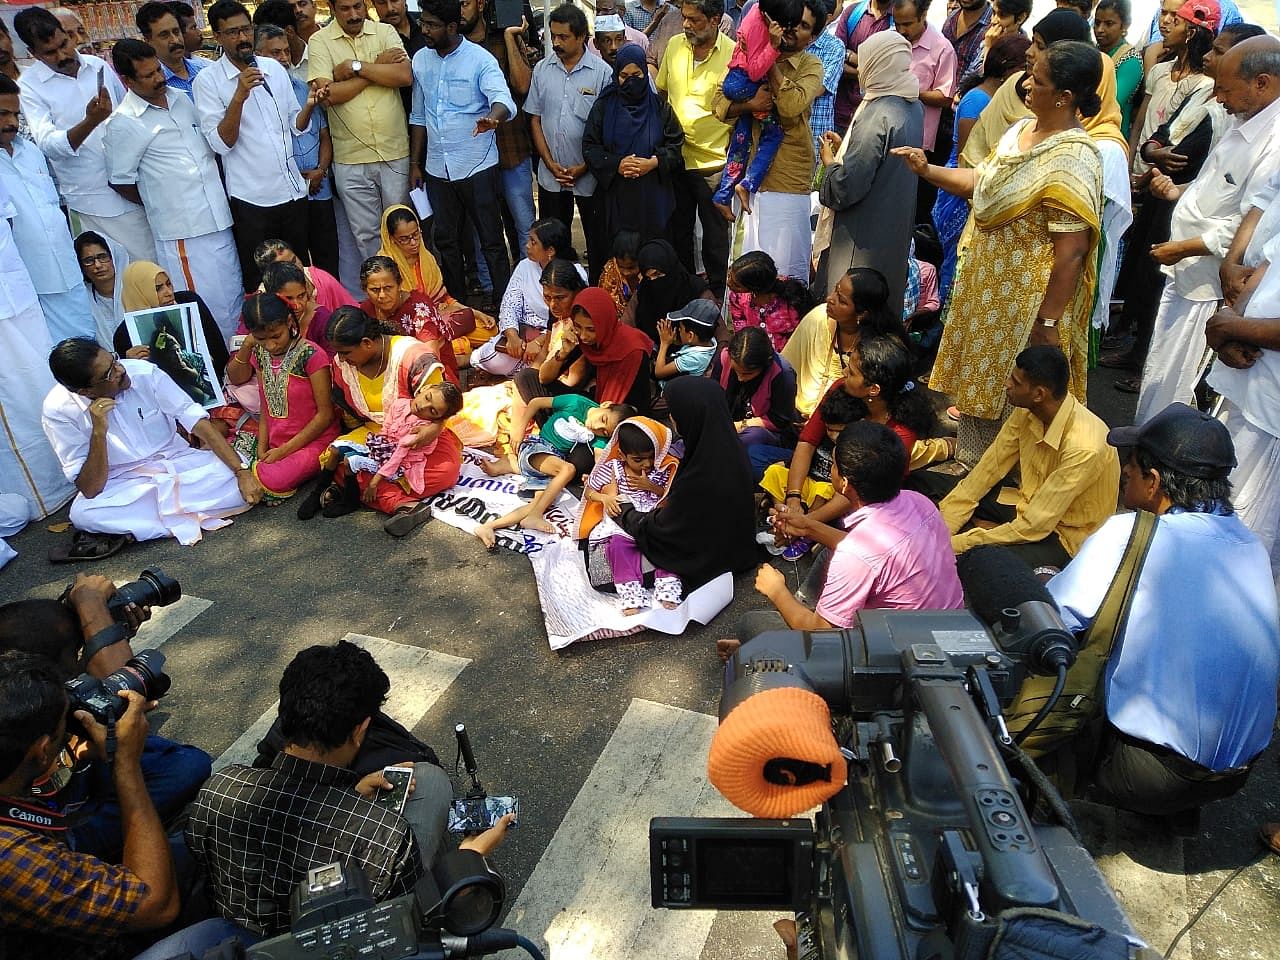 Endosulfan victims from North Kerala's Kasargod staging a sit-in near Kerala Chief Minister Pinarayi Vijayan's official residence as part of ongoing indefinite hunger stir in Thiruvananthapuram.